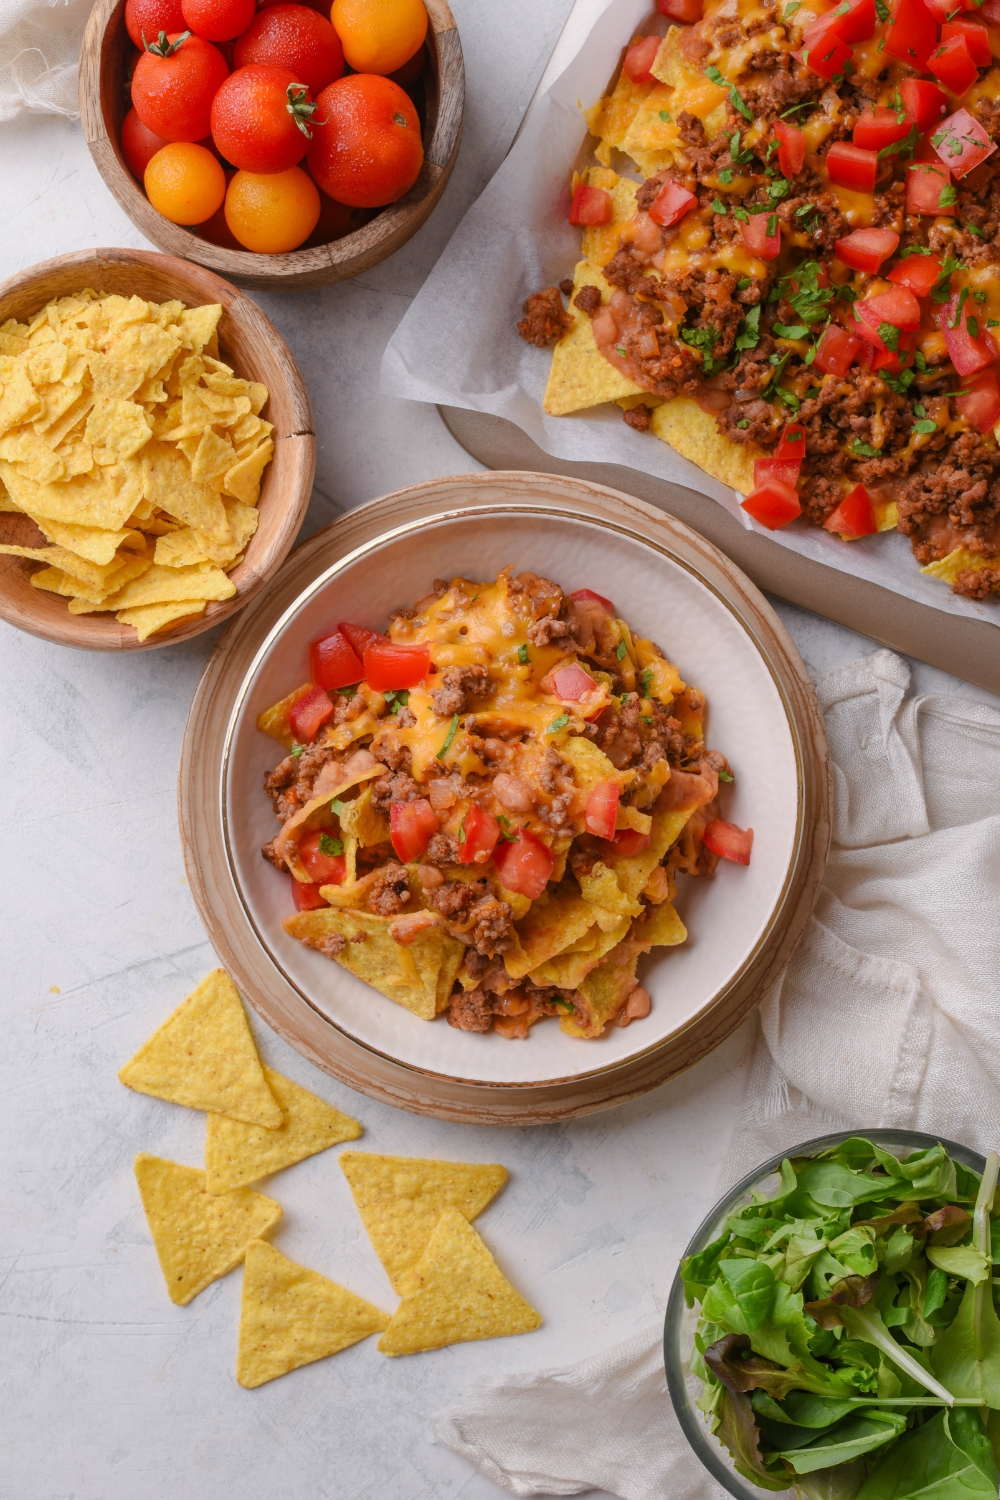 A bowl of beef nachos topped with melted cheese and diced tomatoes. Next to the bowl is a baking sheet filled with more beef nachos.